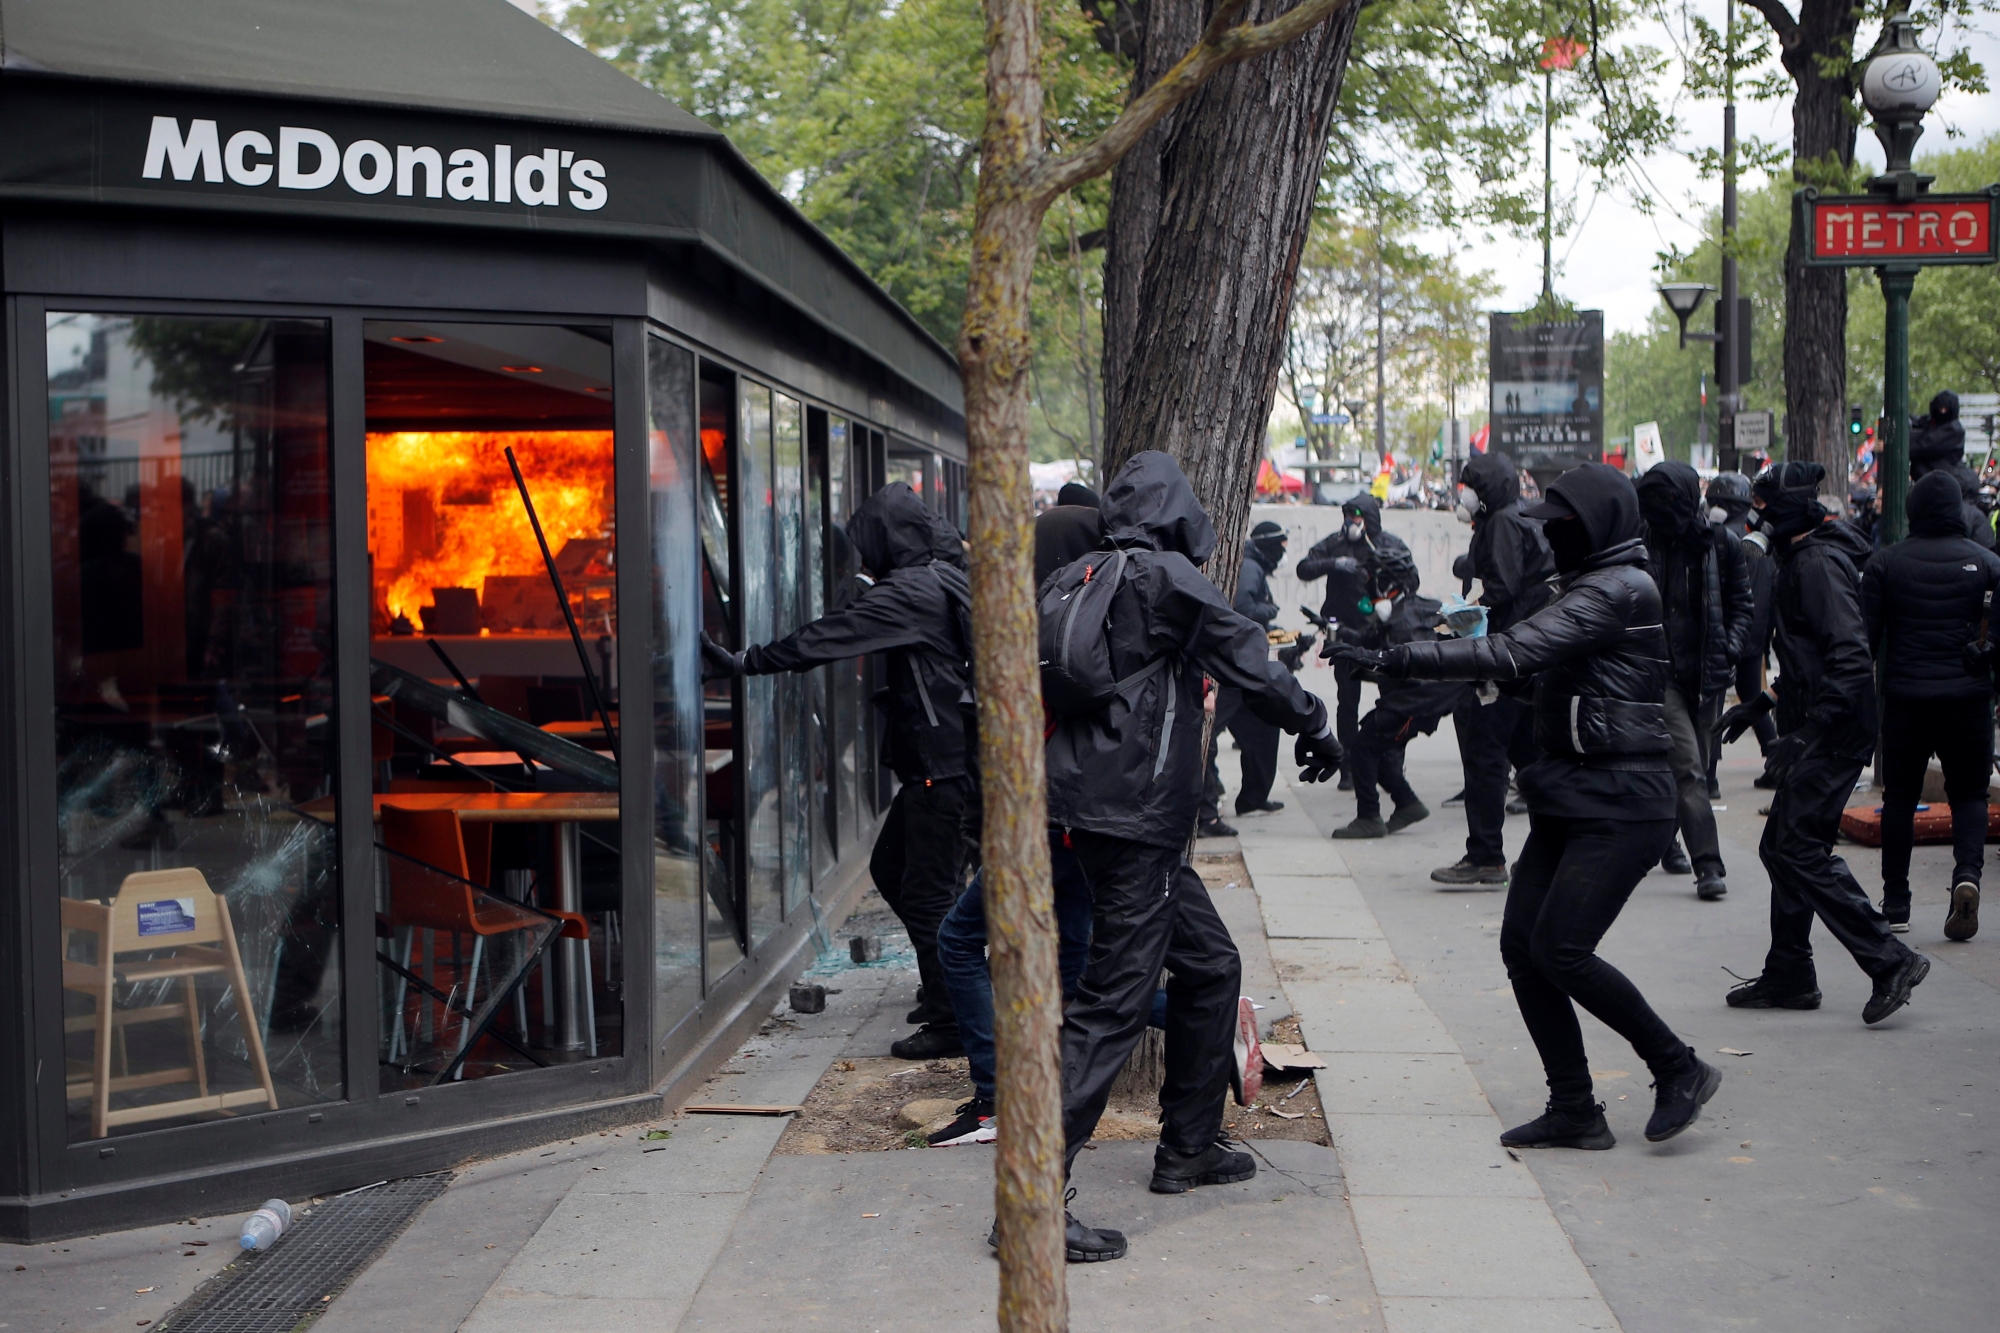 A McDonald's restaurant is hit with petrol bombs thrown by activists during the traditional May Day rally in the center of Paris, France, Tuesday, May 1, 2018. Each year, people around the world take to the streets to mark International Workers' Day, or May Day. (AP Photo/Francois Mori) France May Day